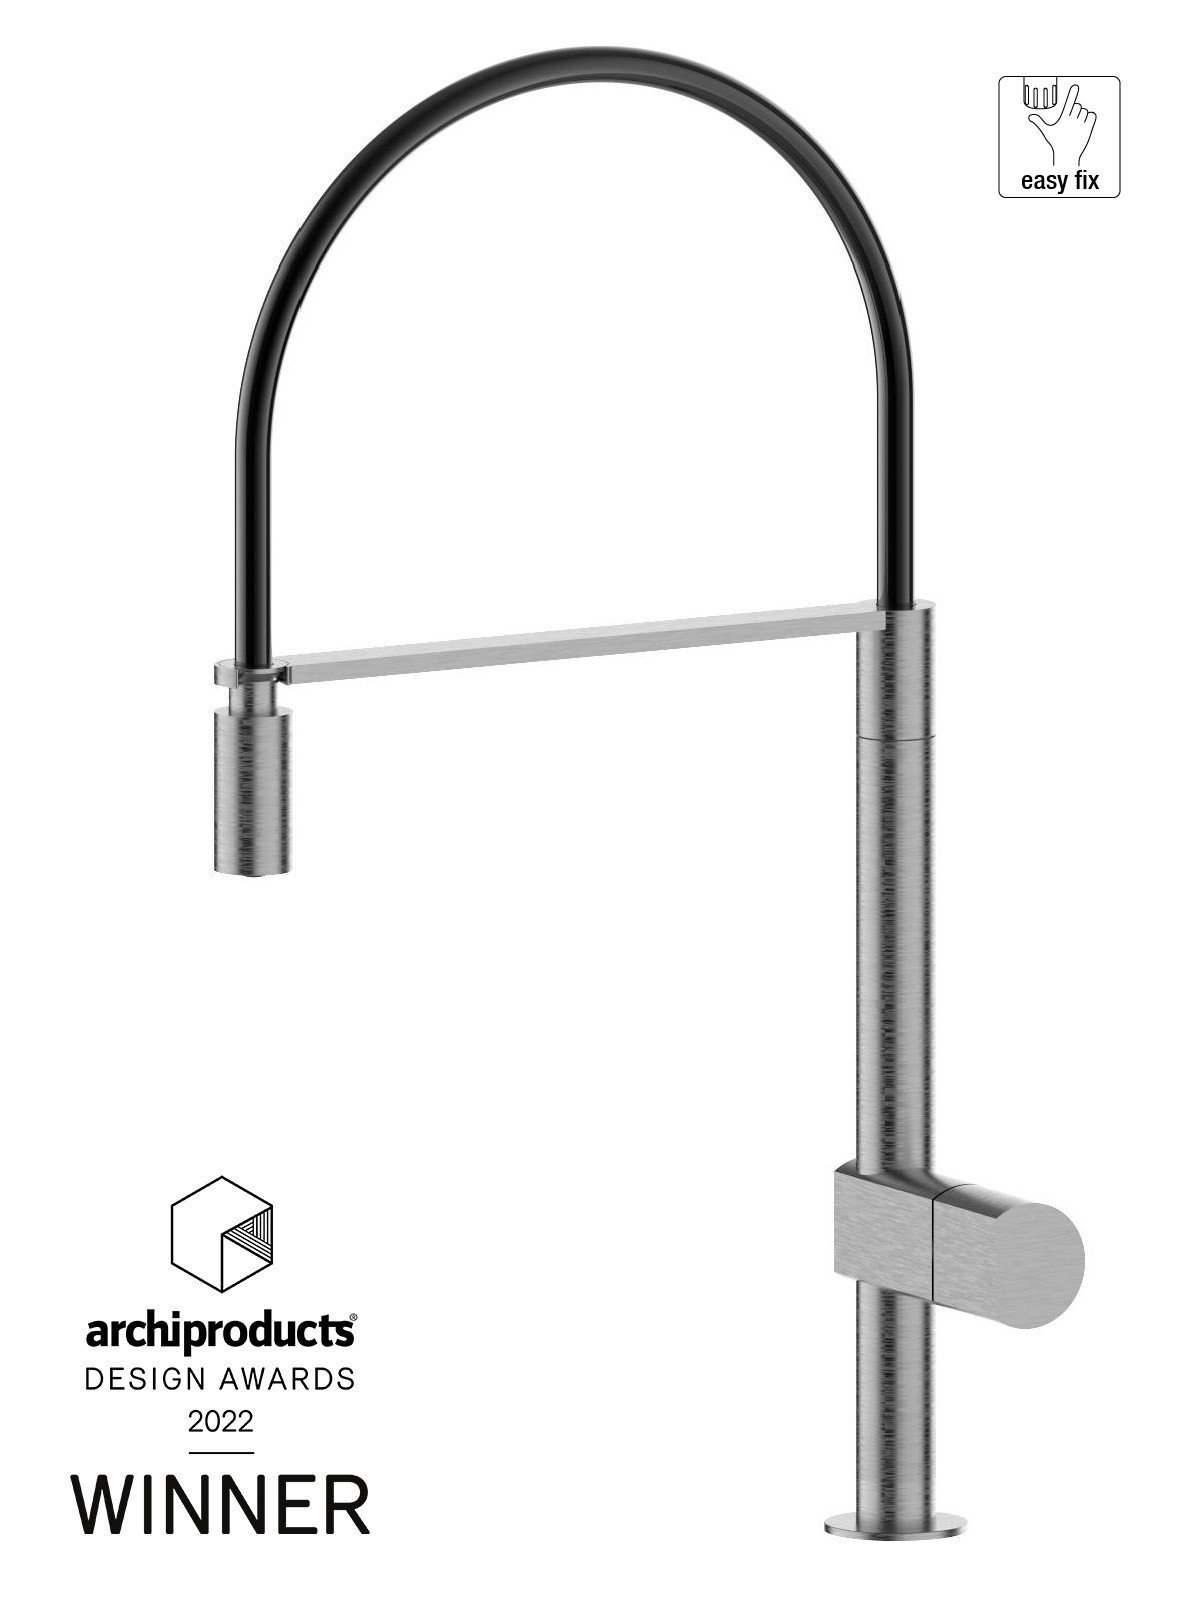 Single-lever sink mixer with spring and shower